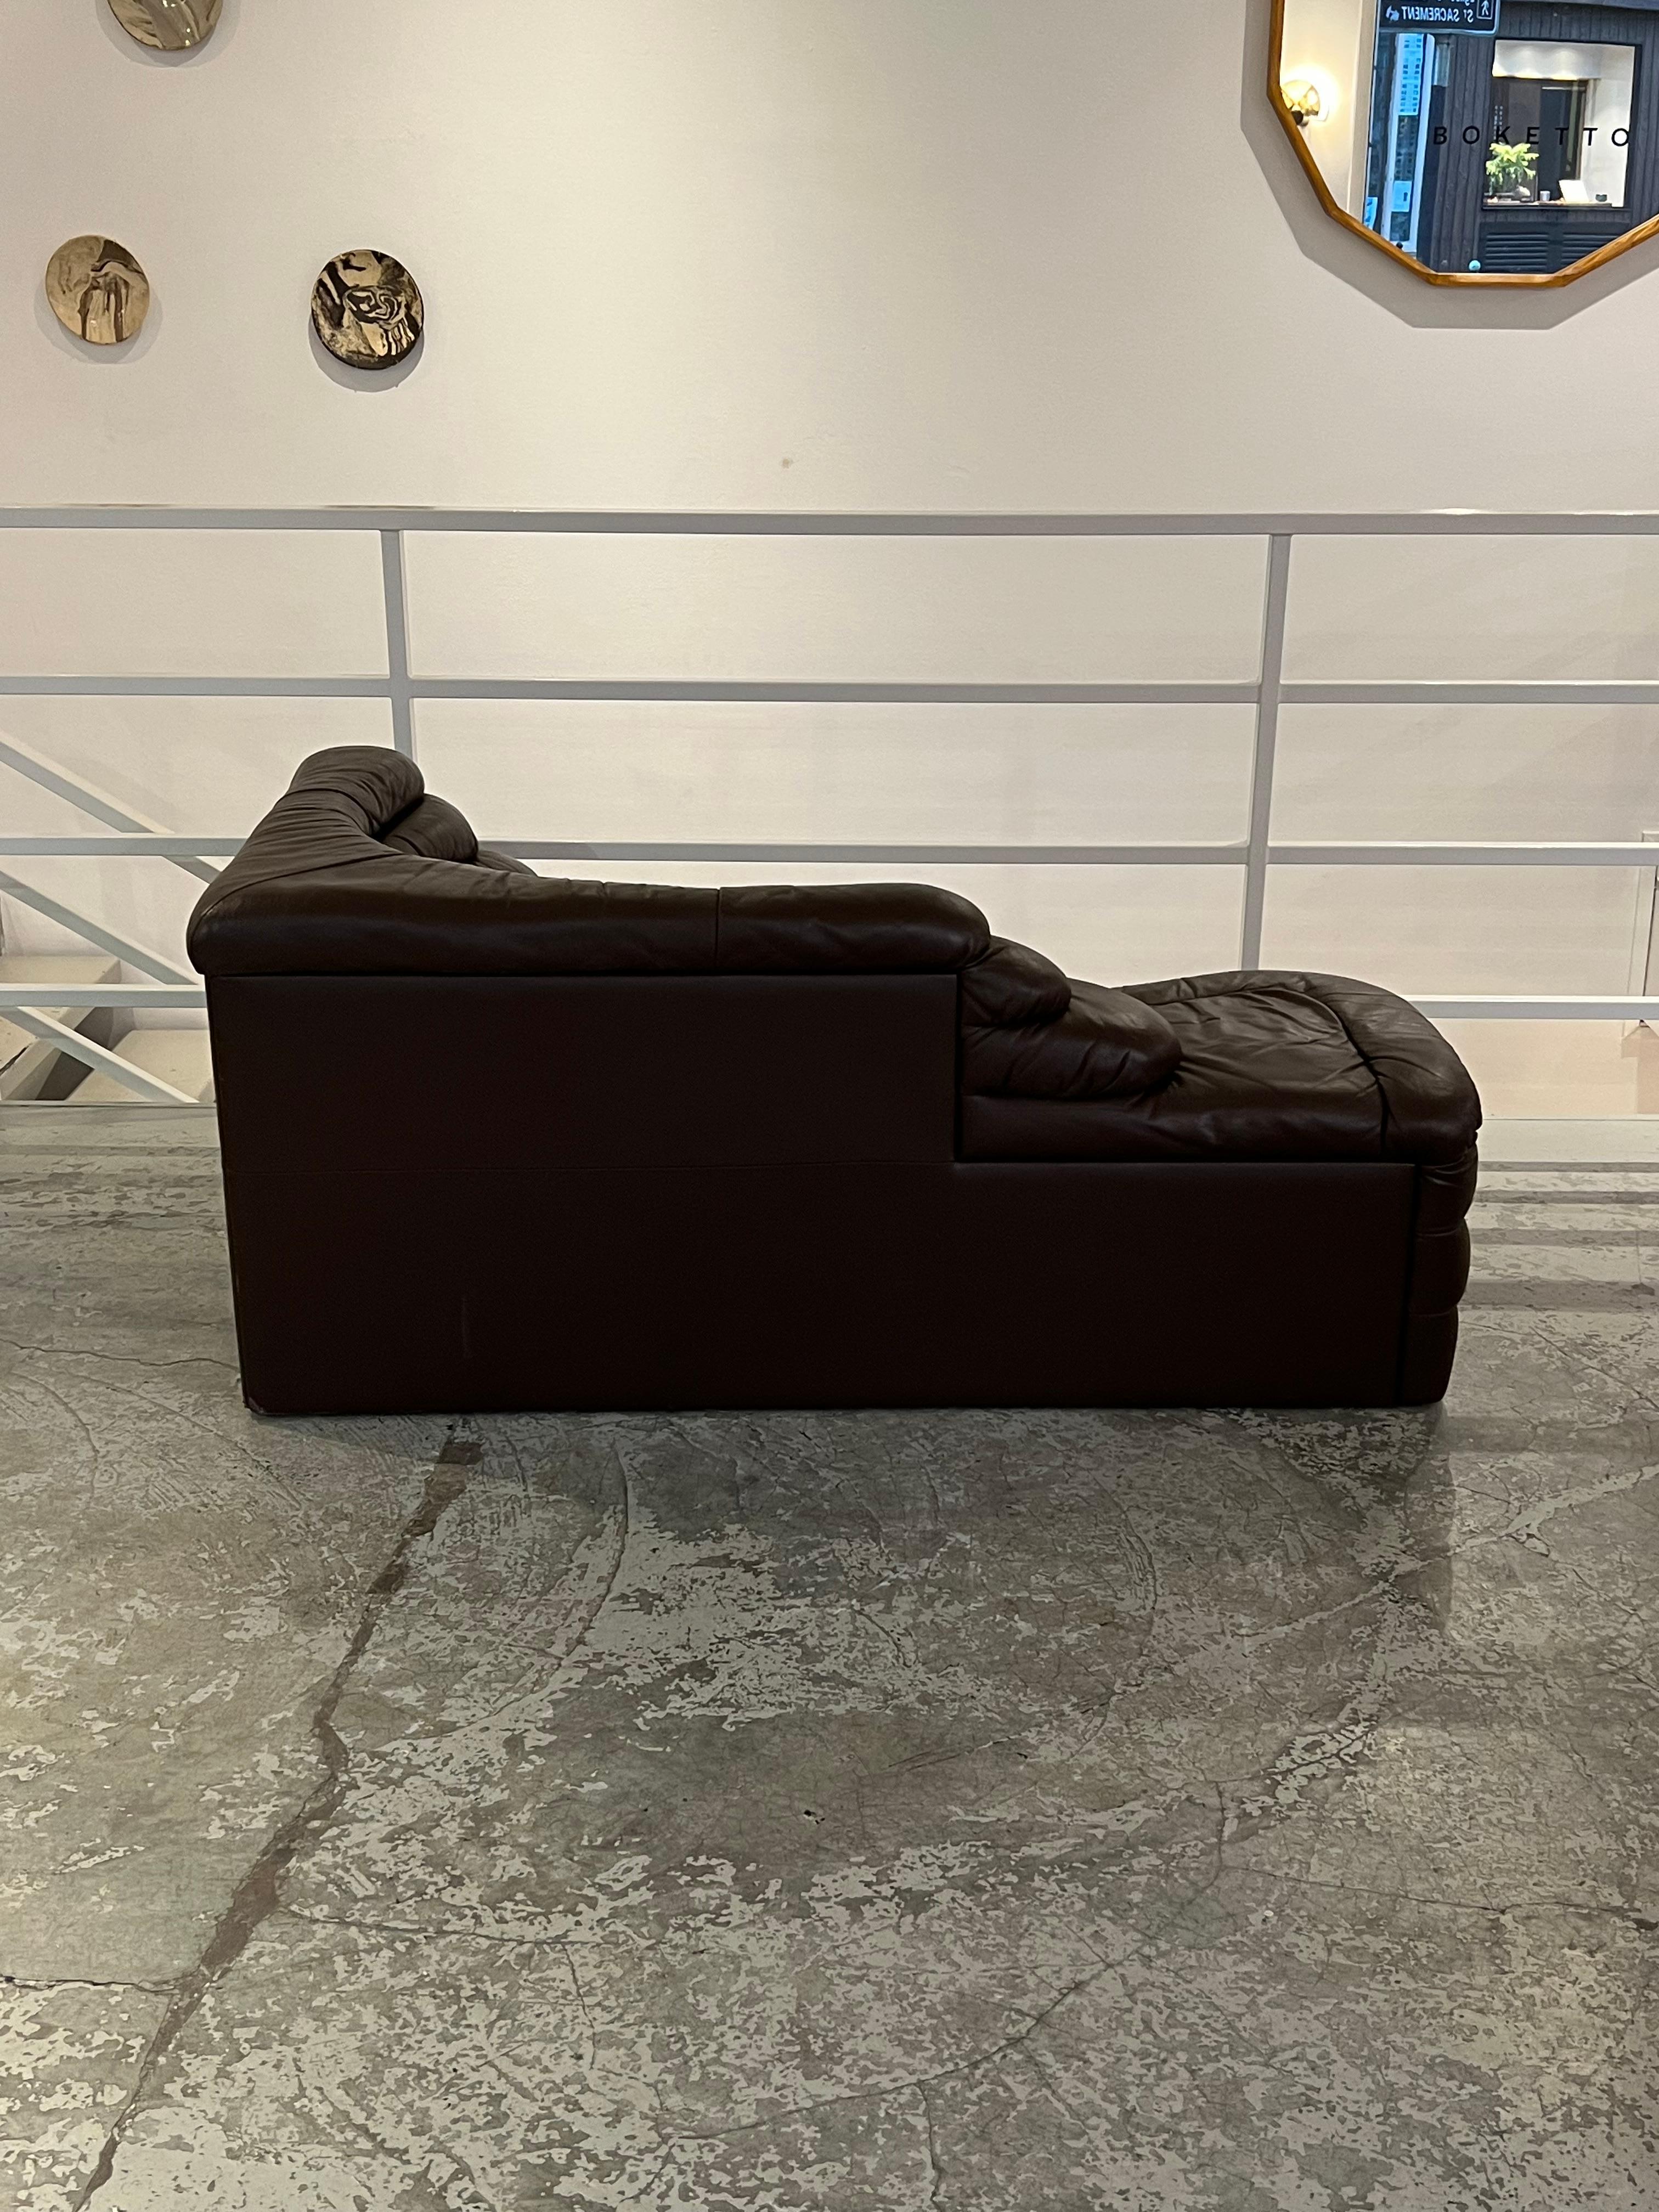 Pair of Terrazza Sofas by Ubald Klug for De Sede, Switzerland, 1973 For Sale 4